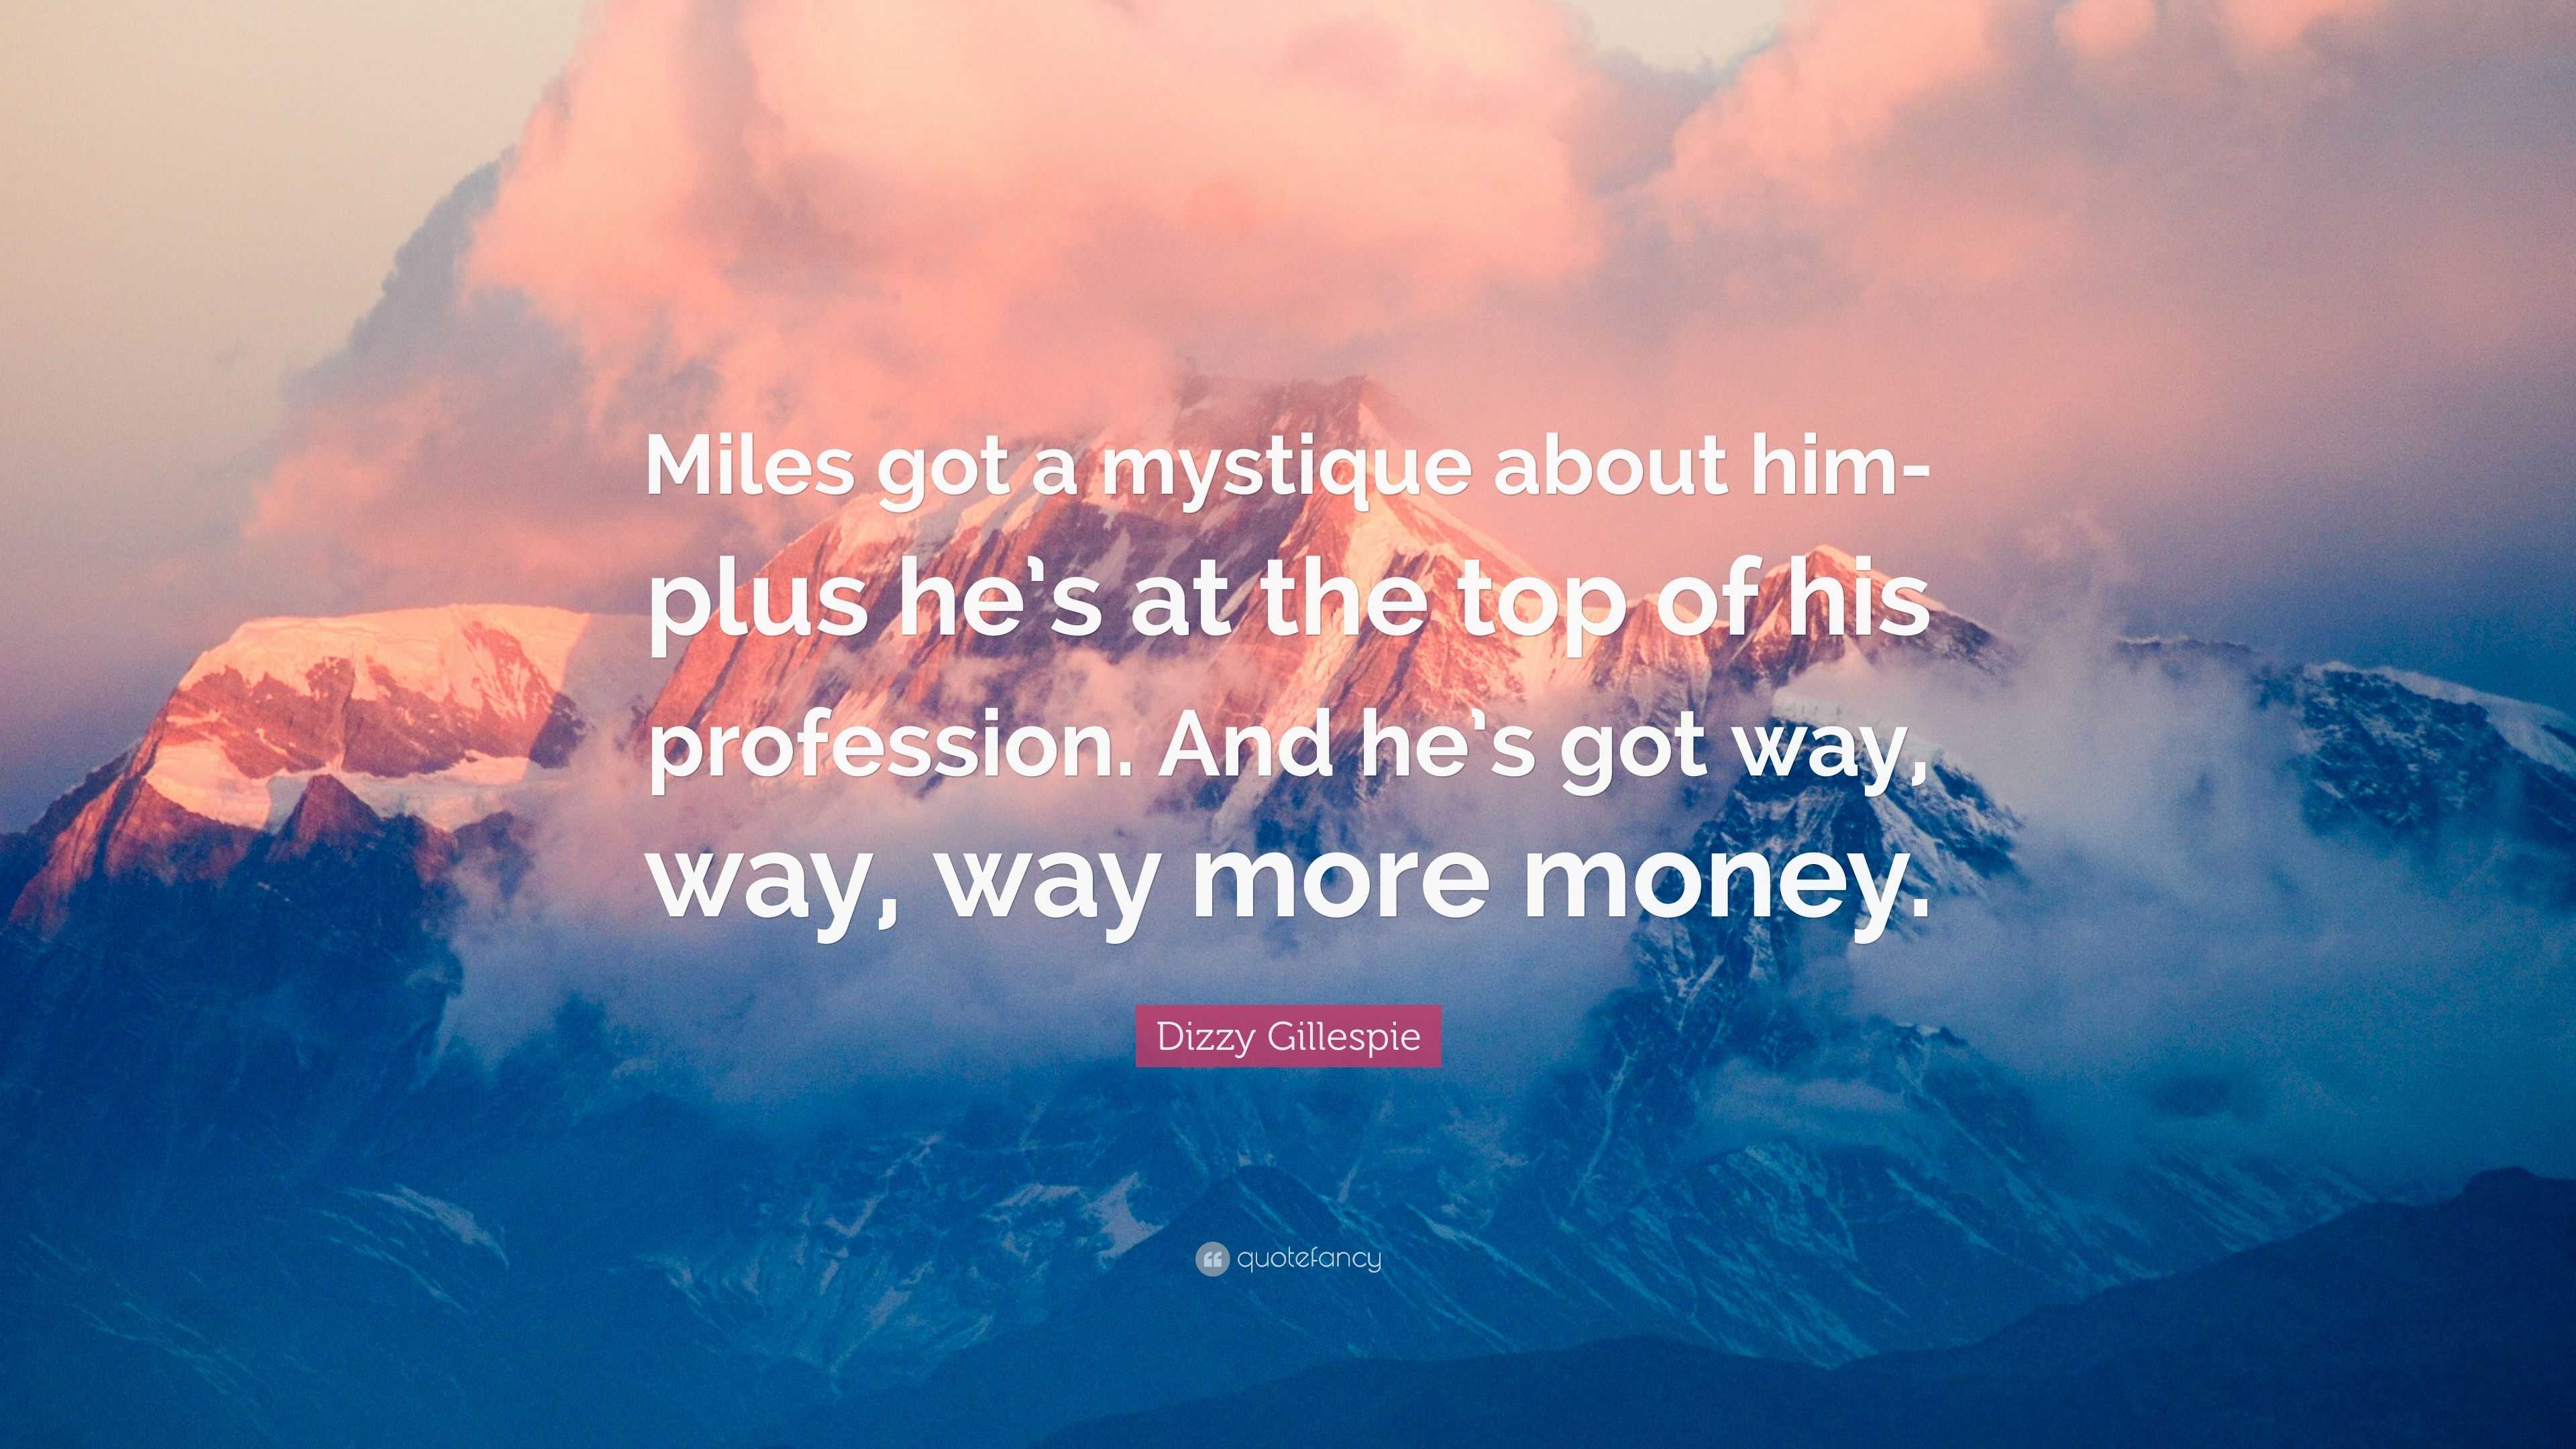 Dizzy Gillespie Quote: "Miles got a mystique about him-plus he's at the top of his profession ...